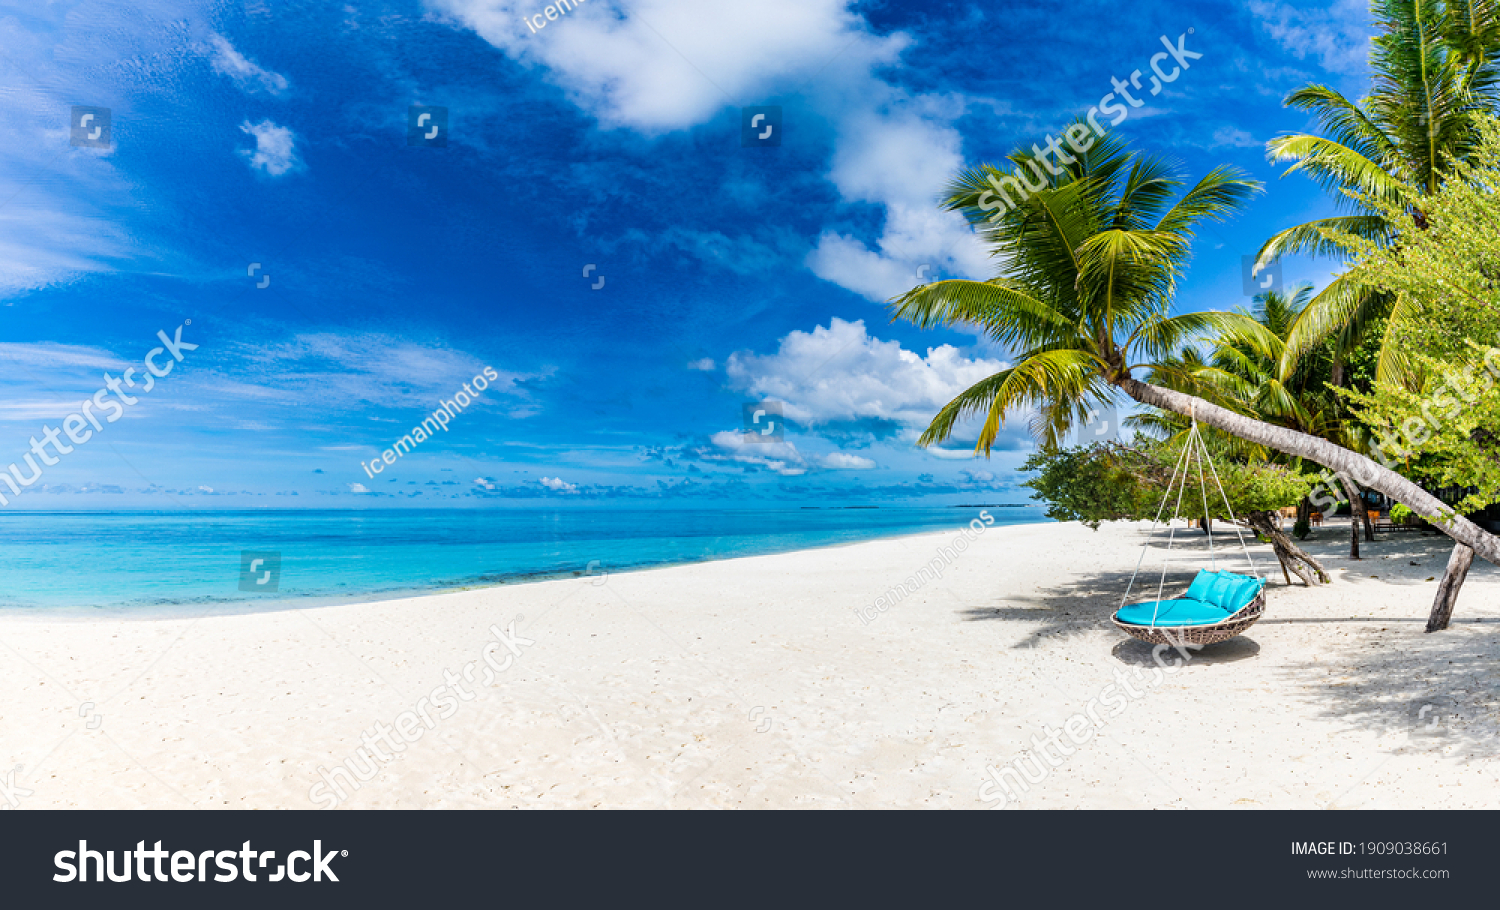 Tropical beach background as summer relax landscape with beach swing or hammock and white sand and calm sea for beach template. Amazing beach scene vacation and summer holiday concept. Luxury travel #1909038661